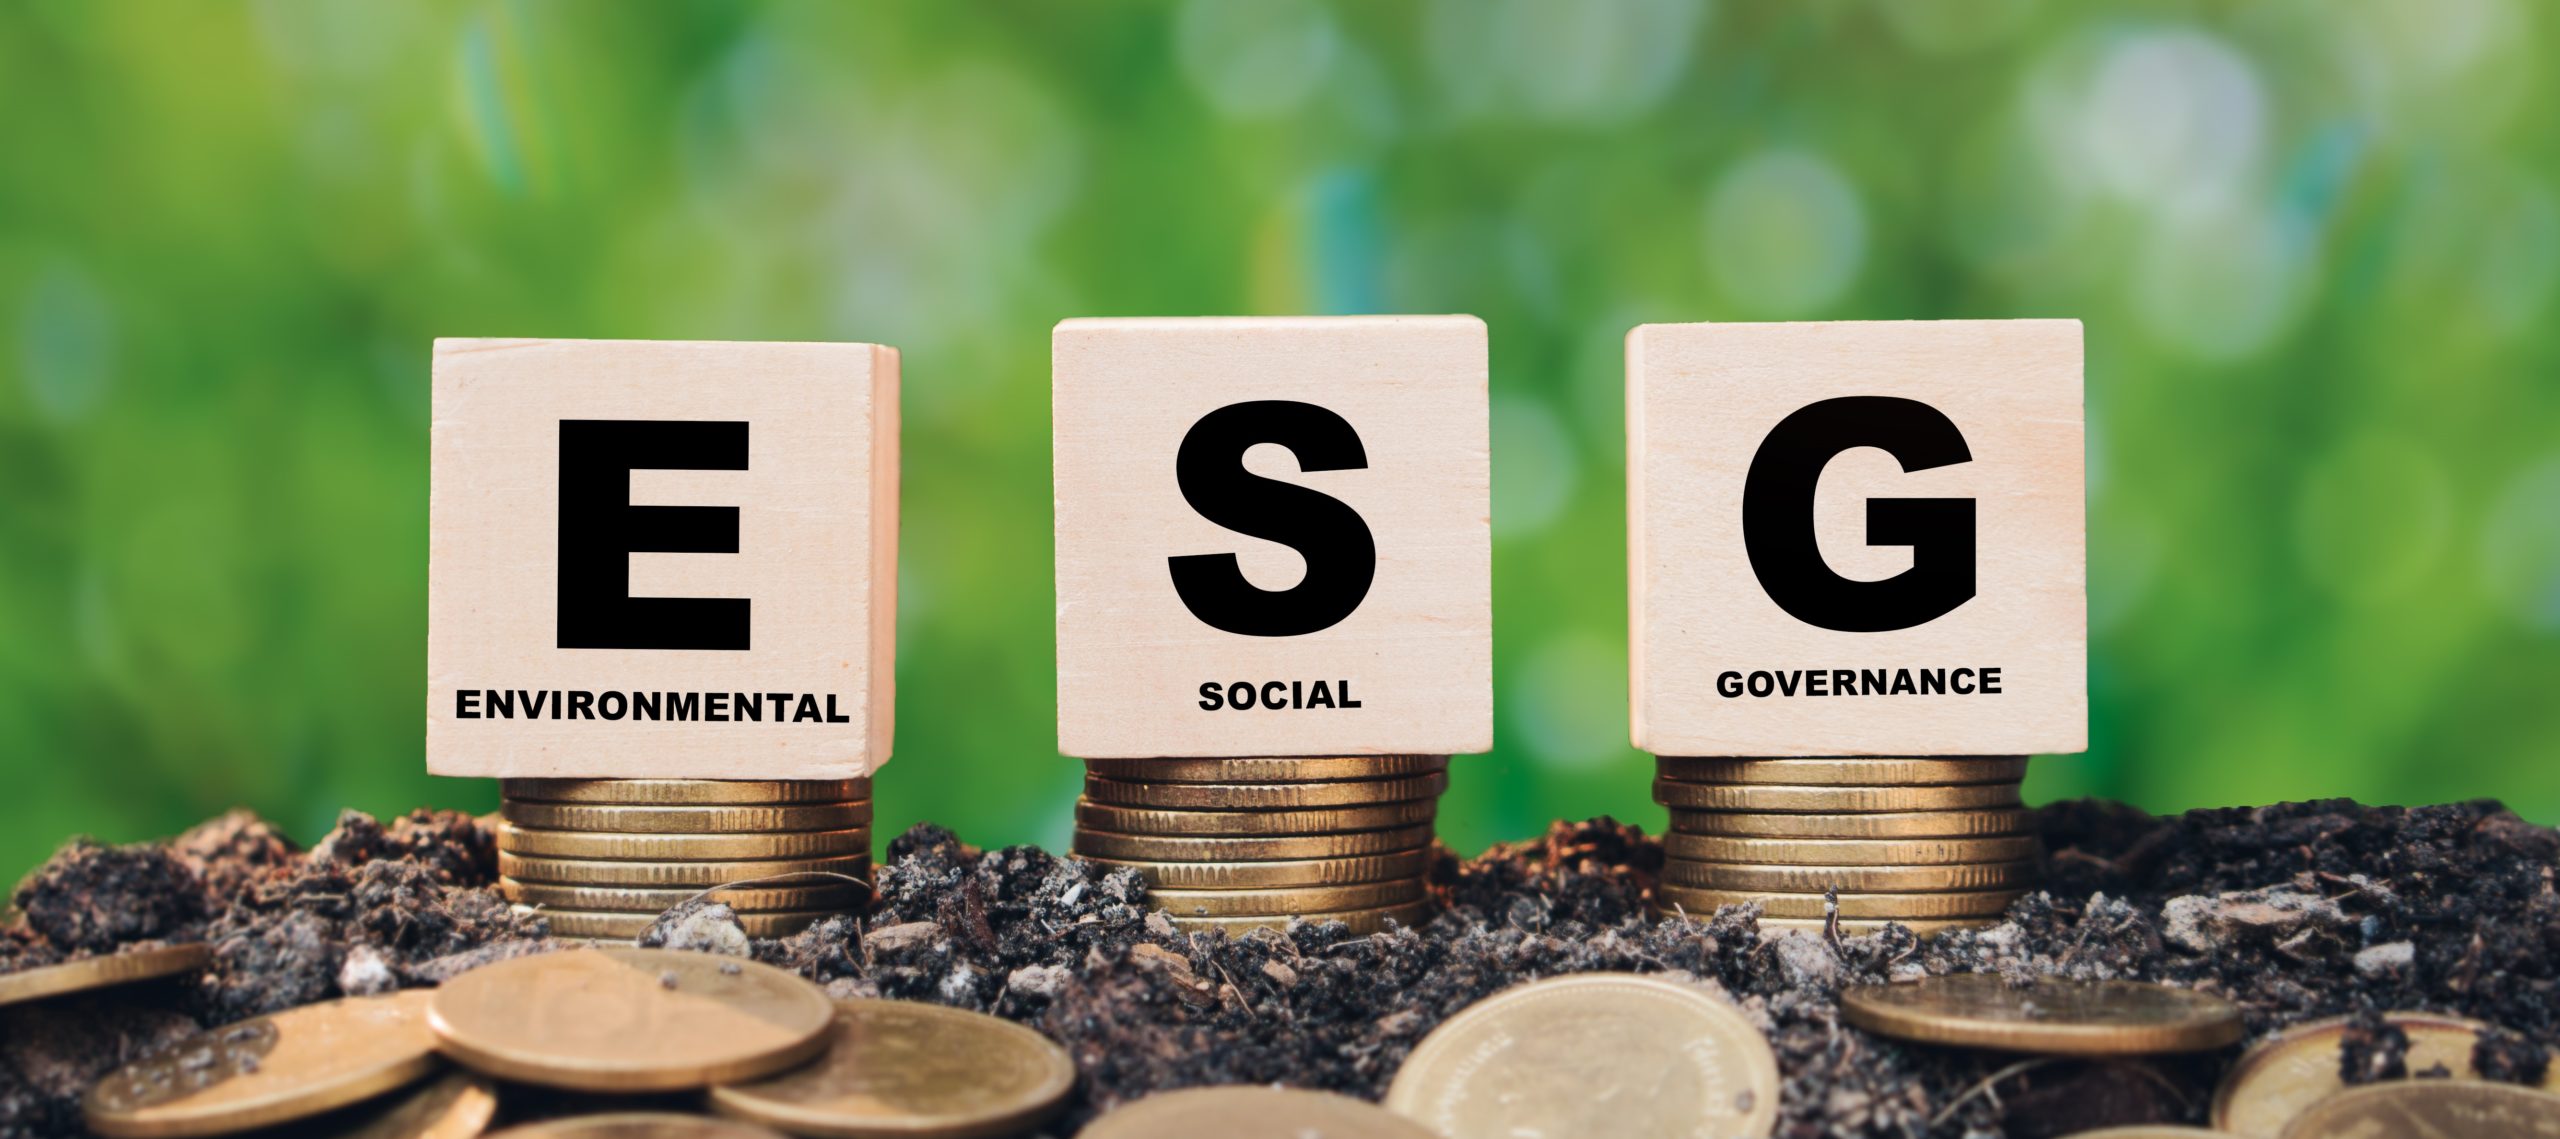 Companies seeking investment are more likely to secure funding if they can demonstrate ESG credentials.